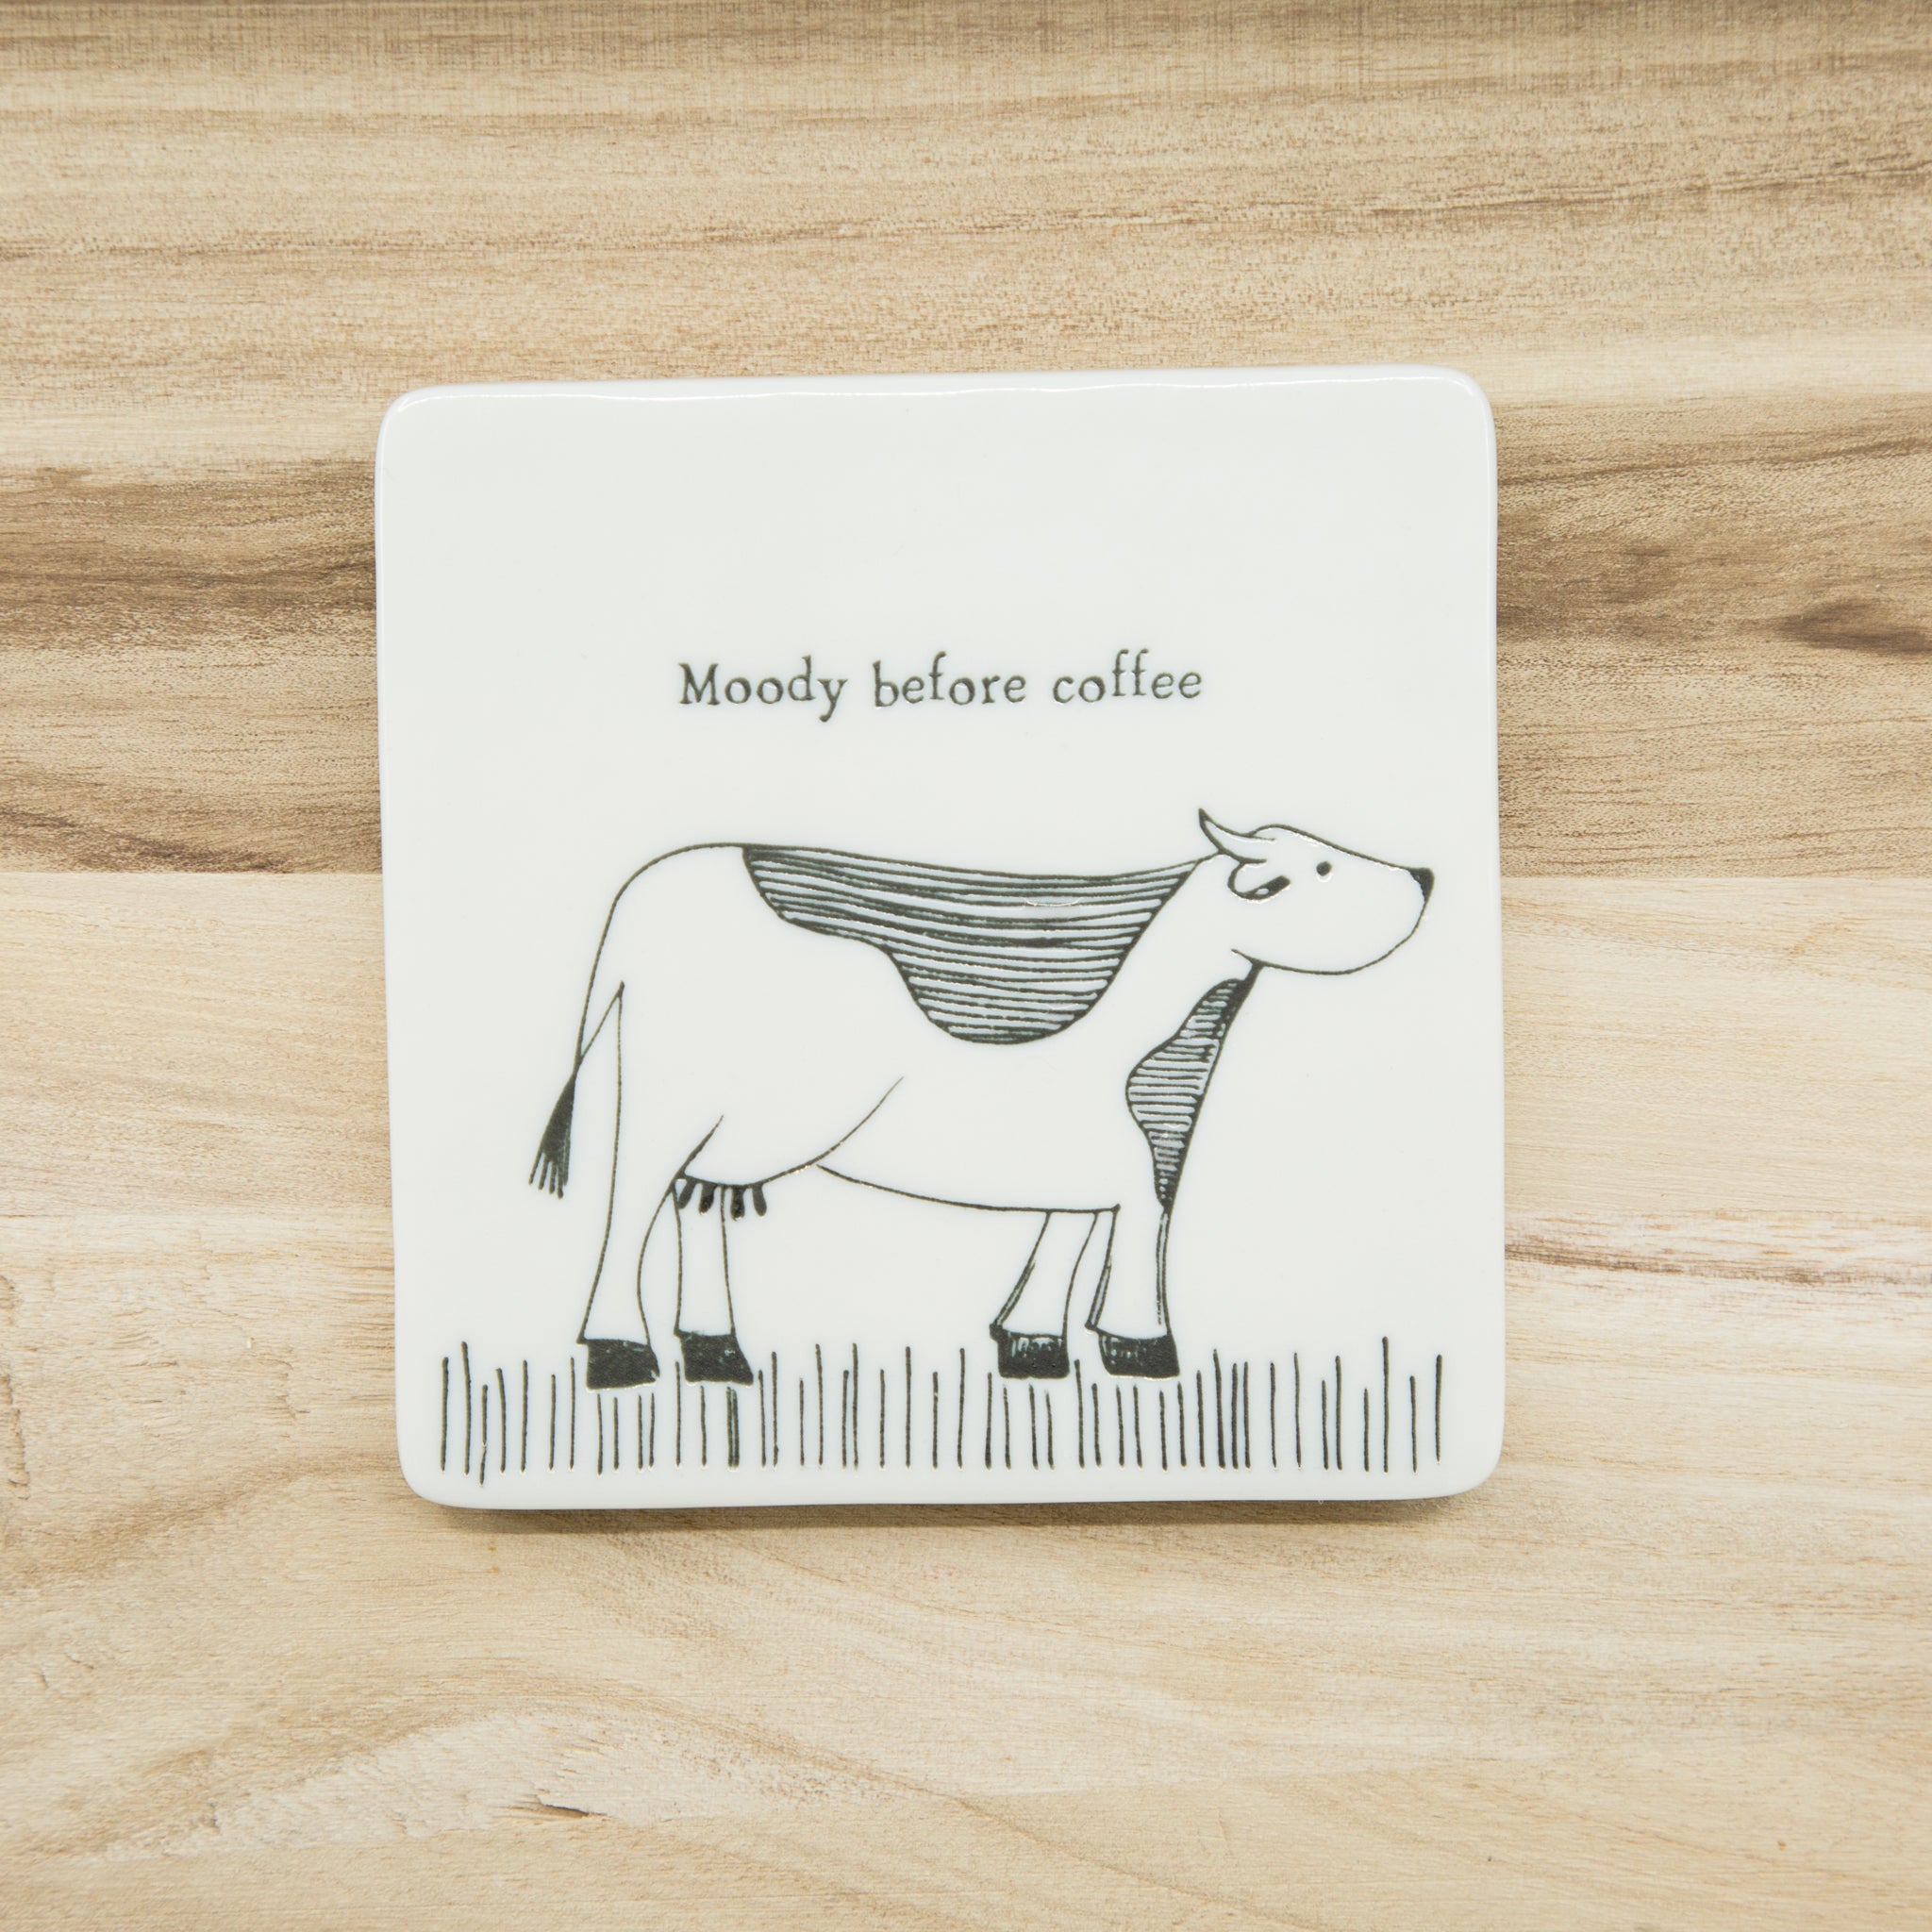 Moody before coffee - Porcelain Coaster